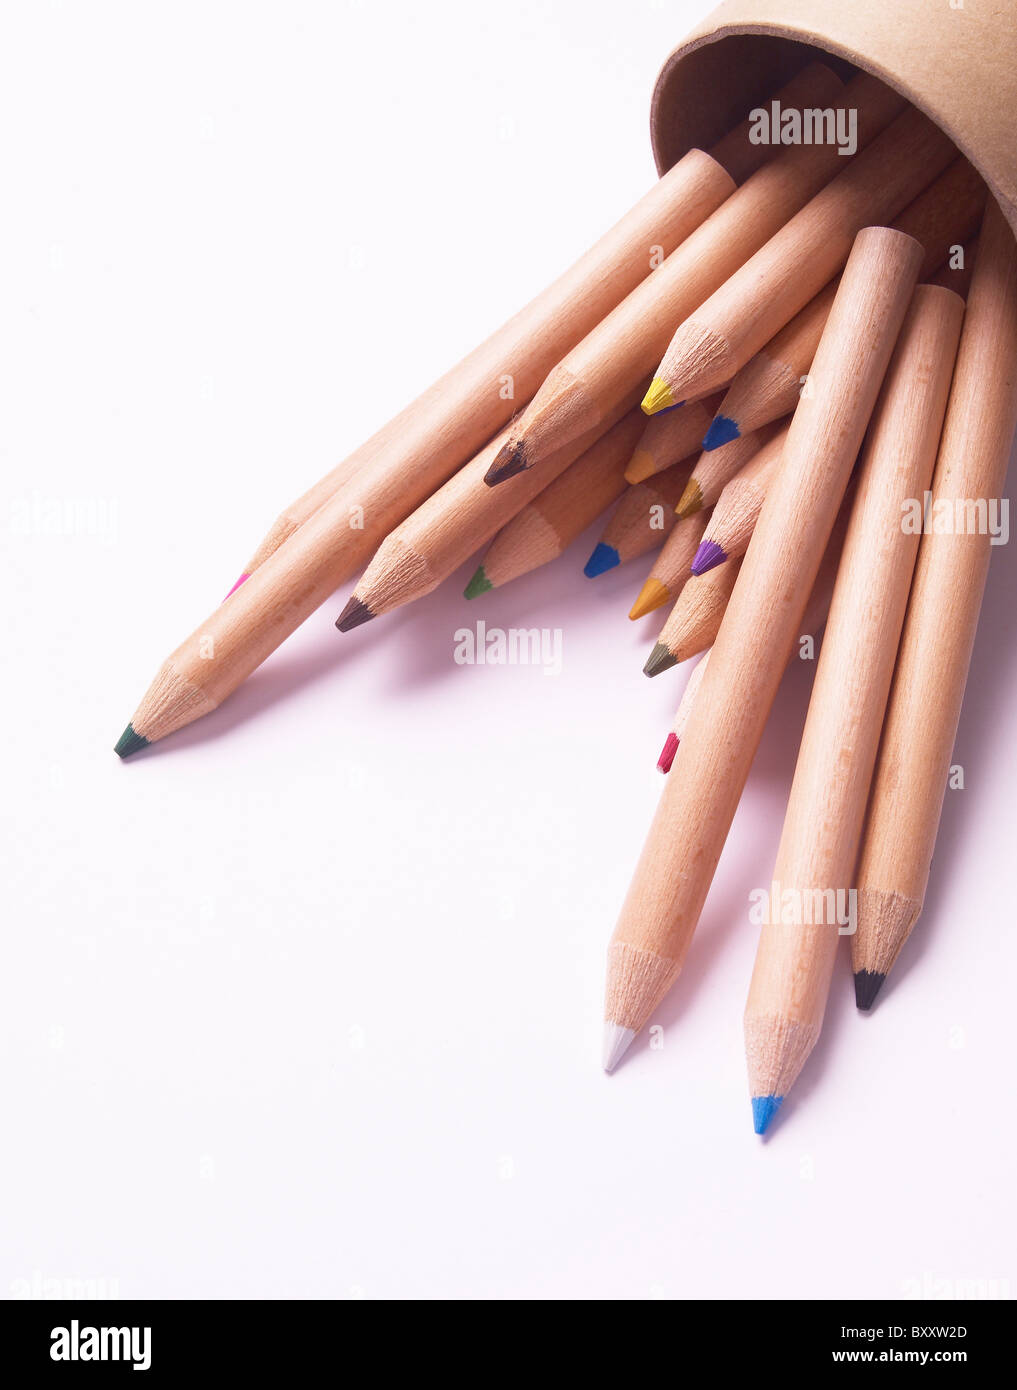 small coloured colored pencils coming out of a cardboard tubular box Stock Photo